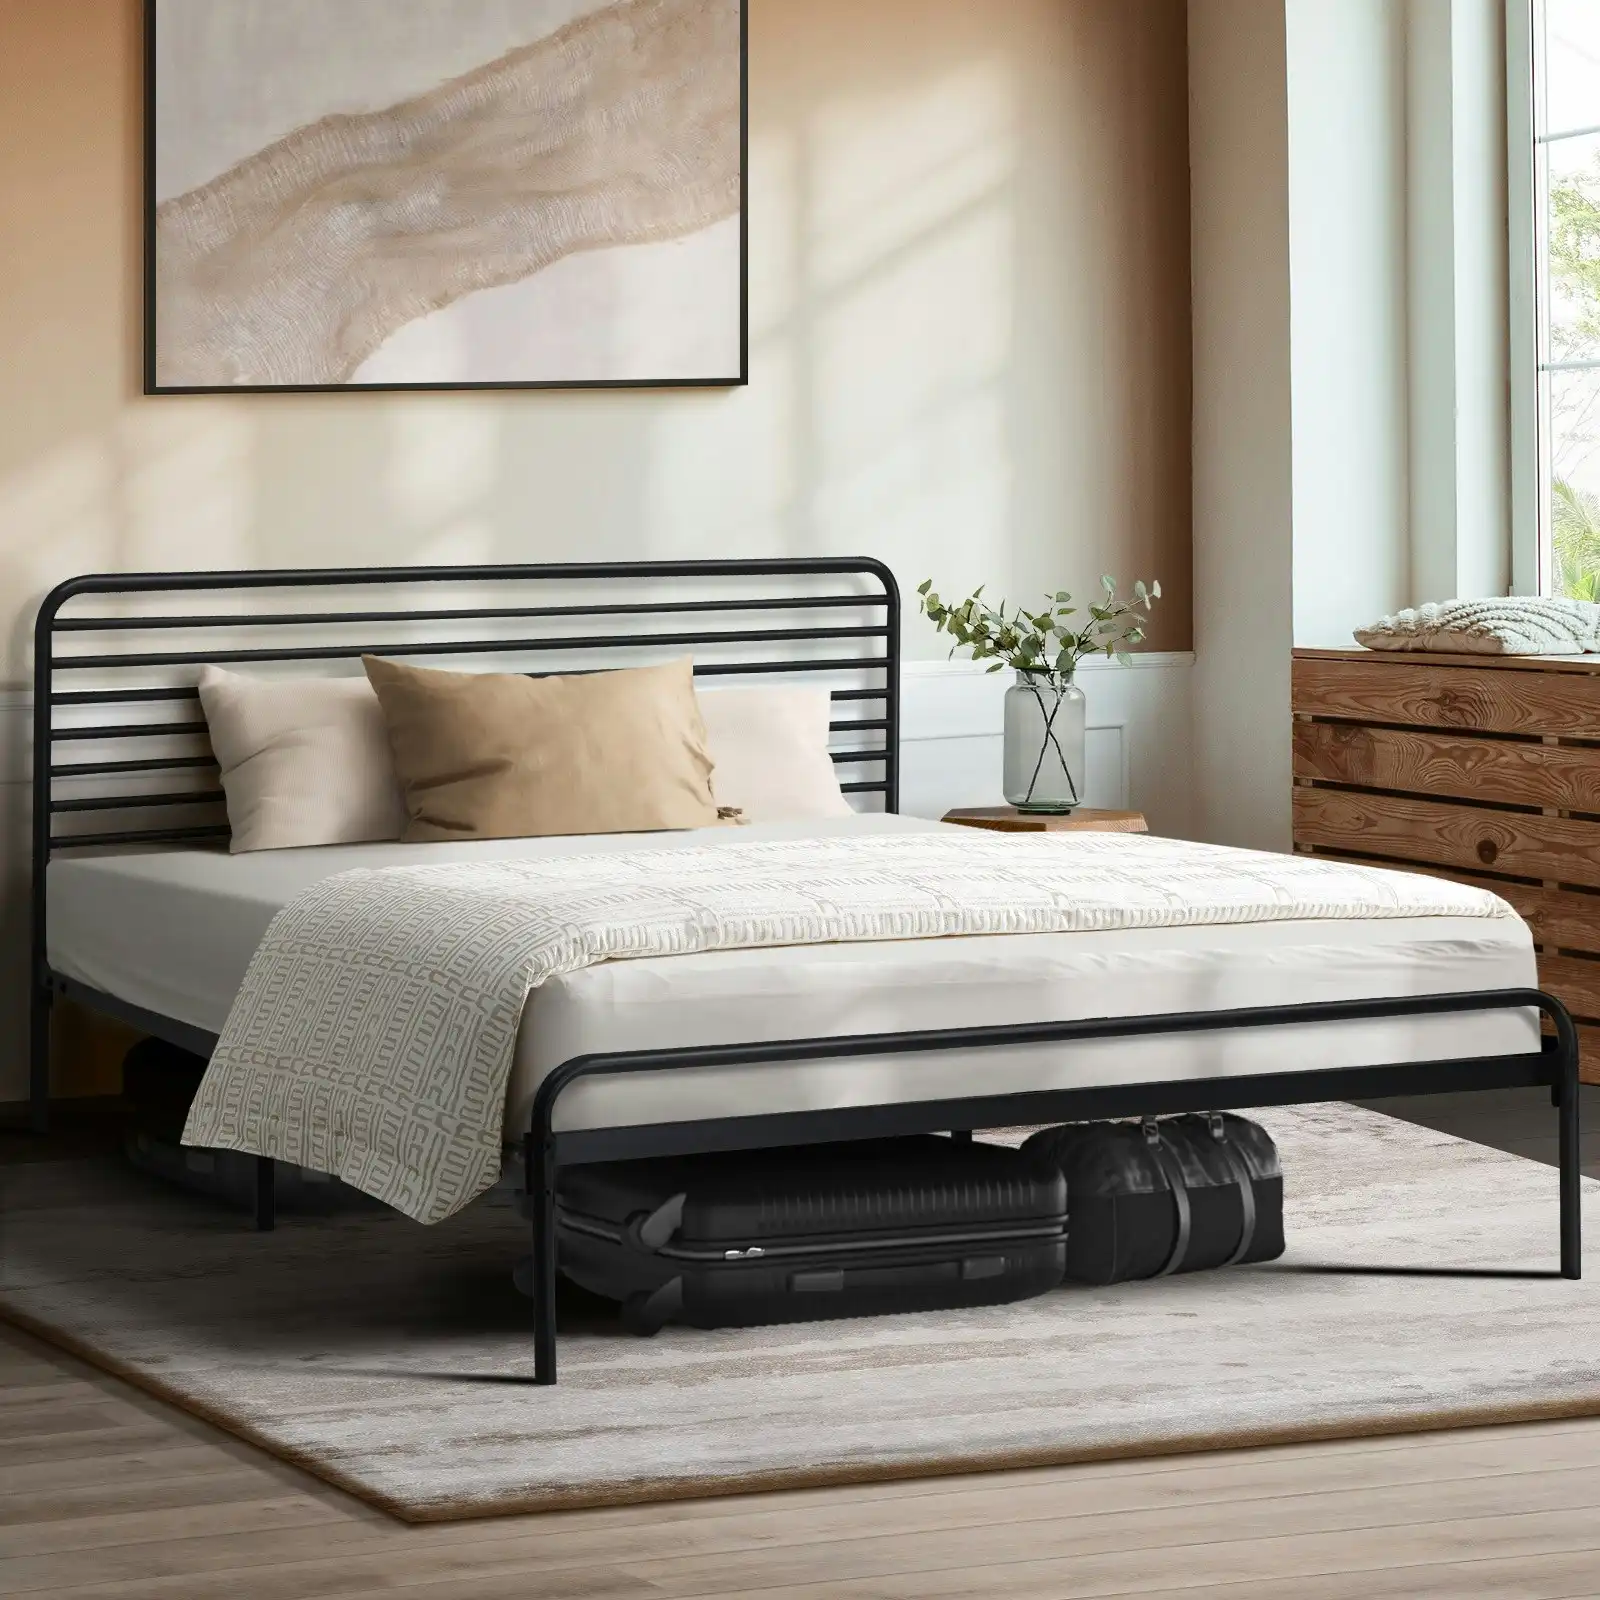 Oikiture Metal Bed Frame Queen Size Beds Platform